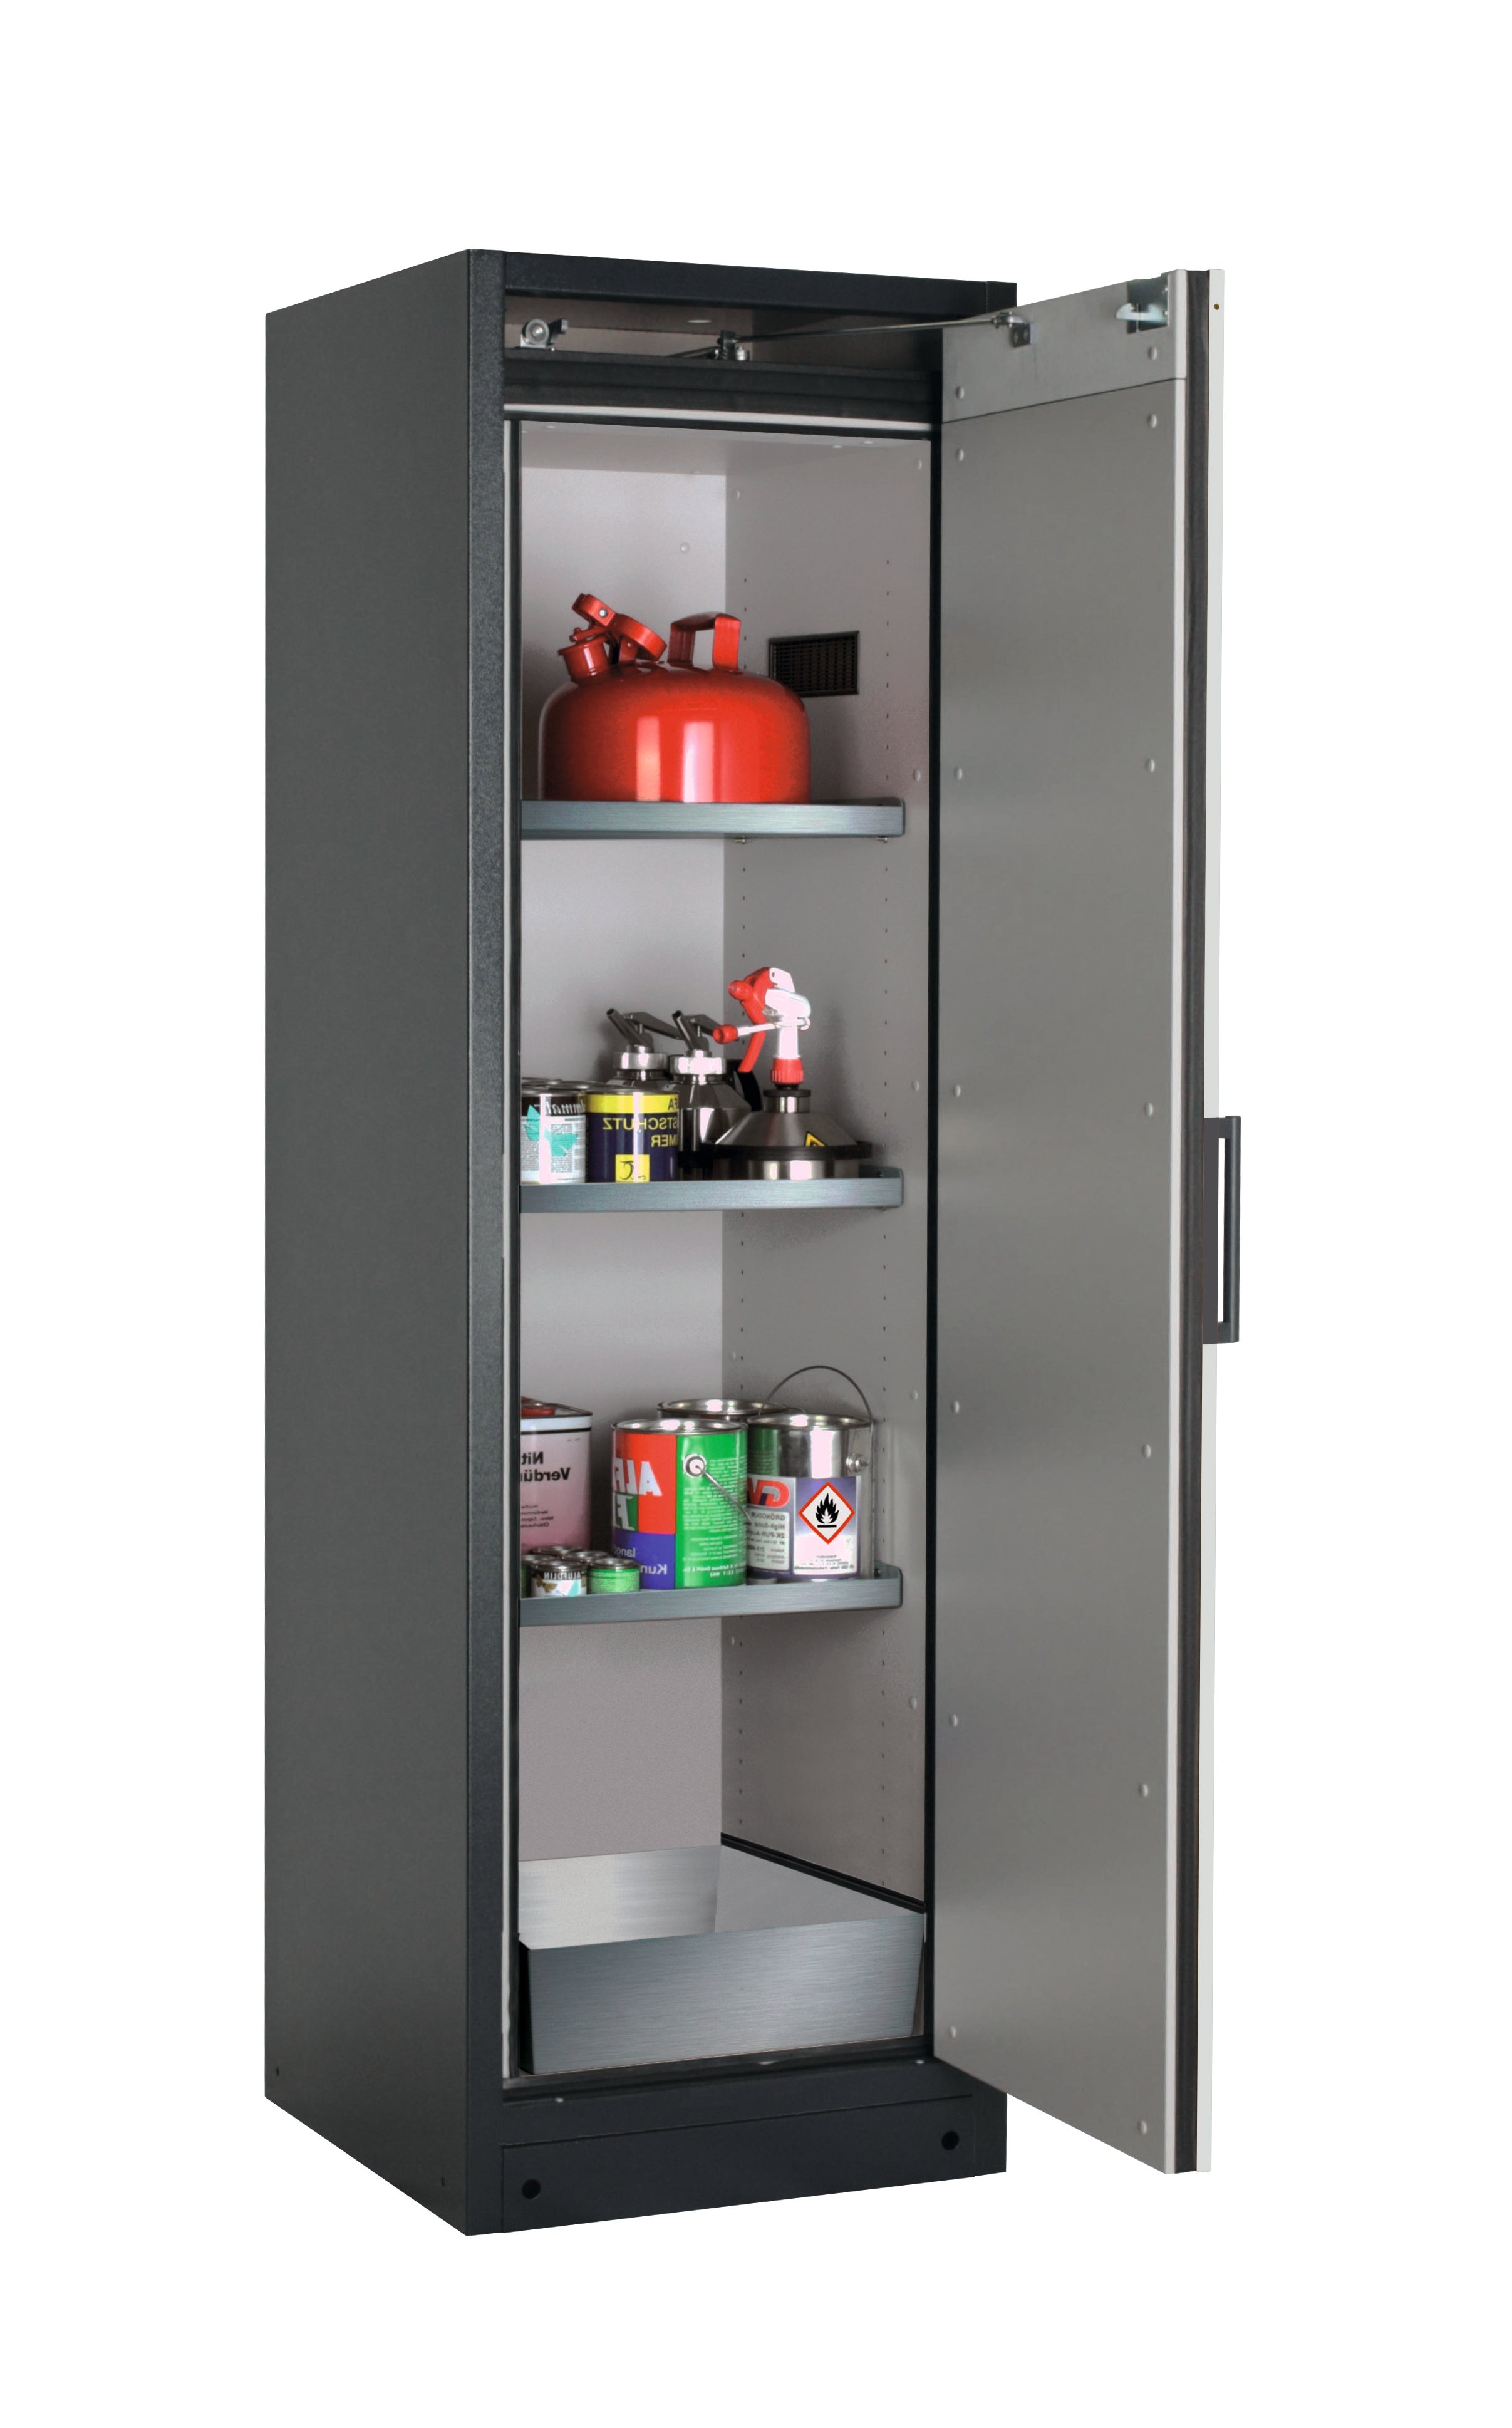 Type 90 safety storage cabinet Q-PEGASUS-90 model Q90.195.060.WDACR in light grey RAL 7035 with 3x shelf standard (stainless steel 1.4301),